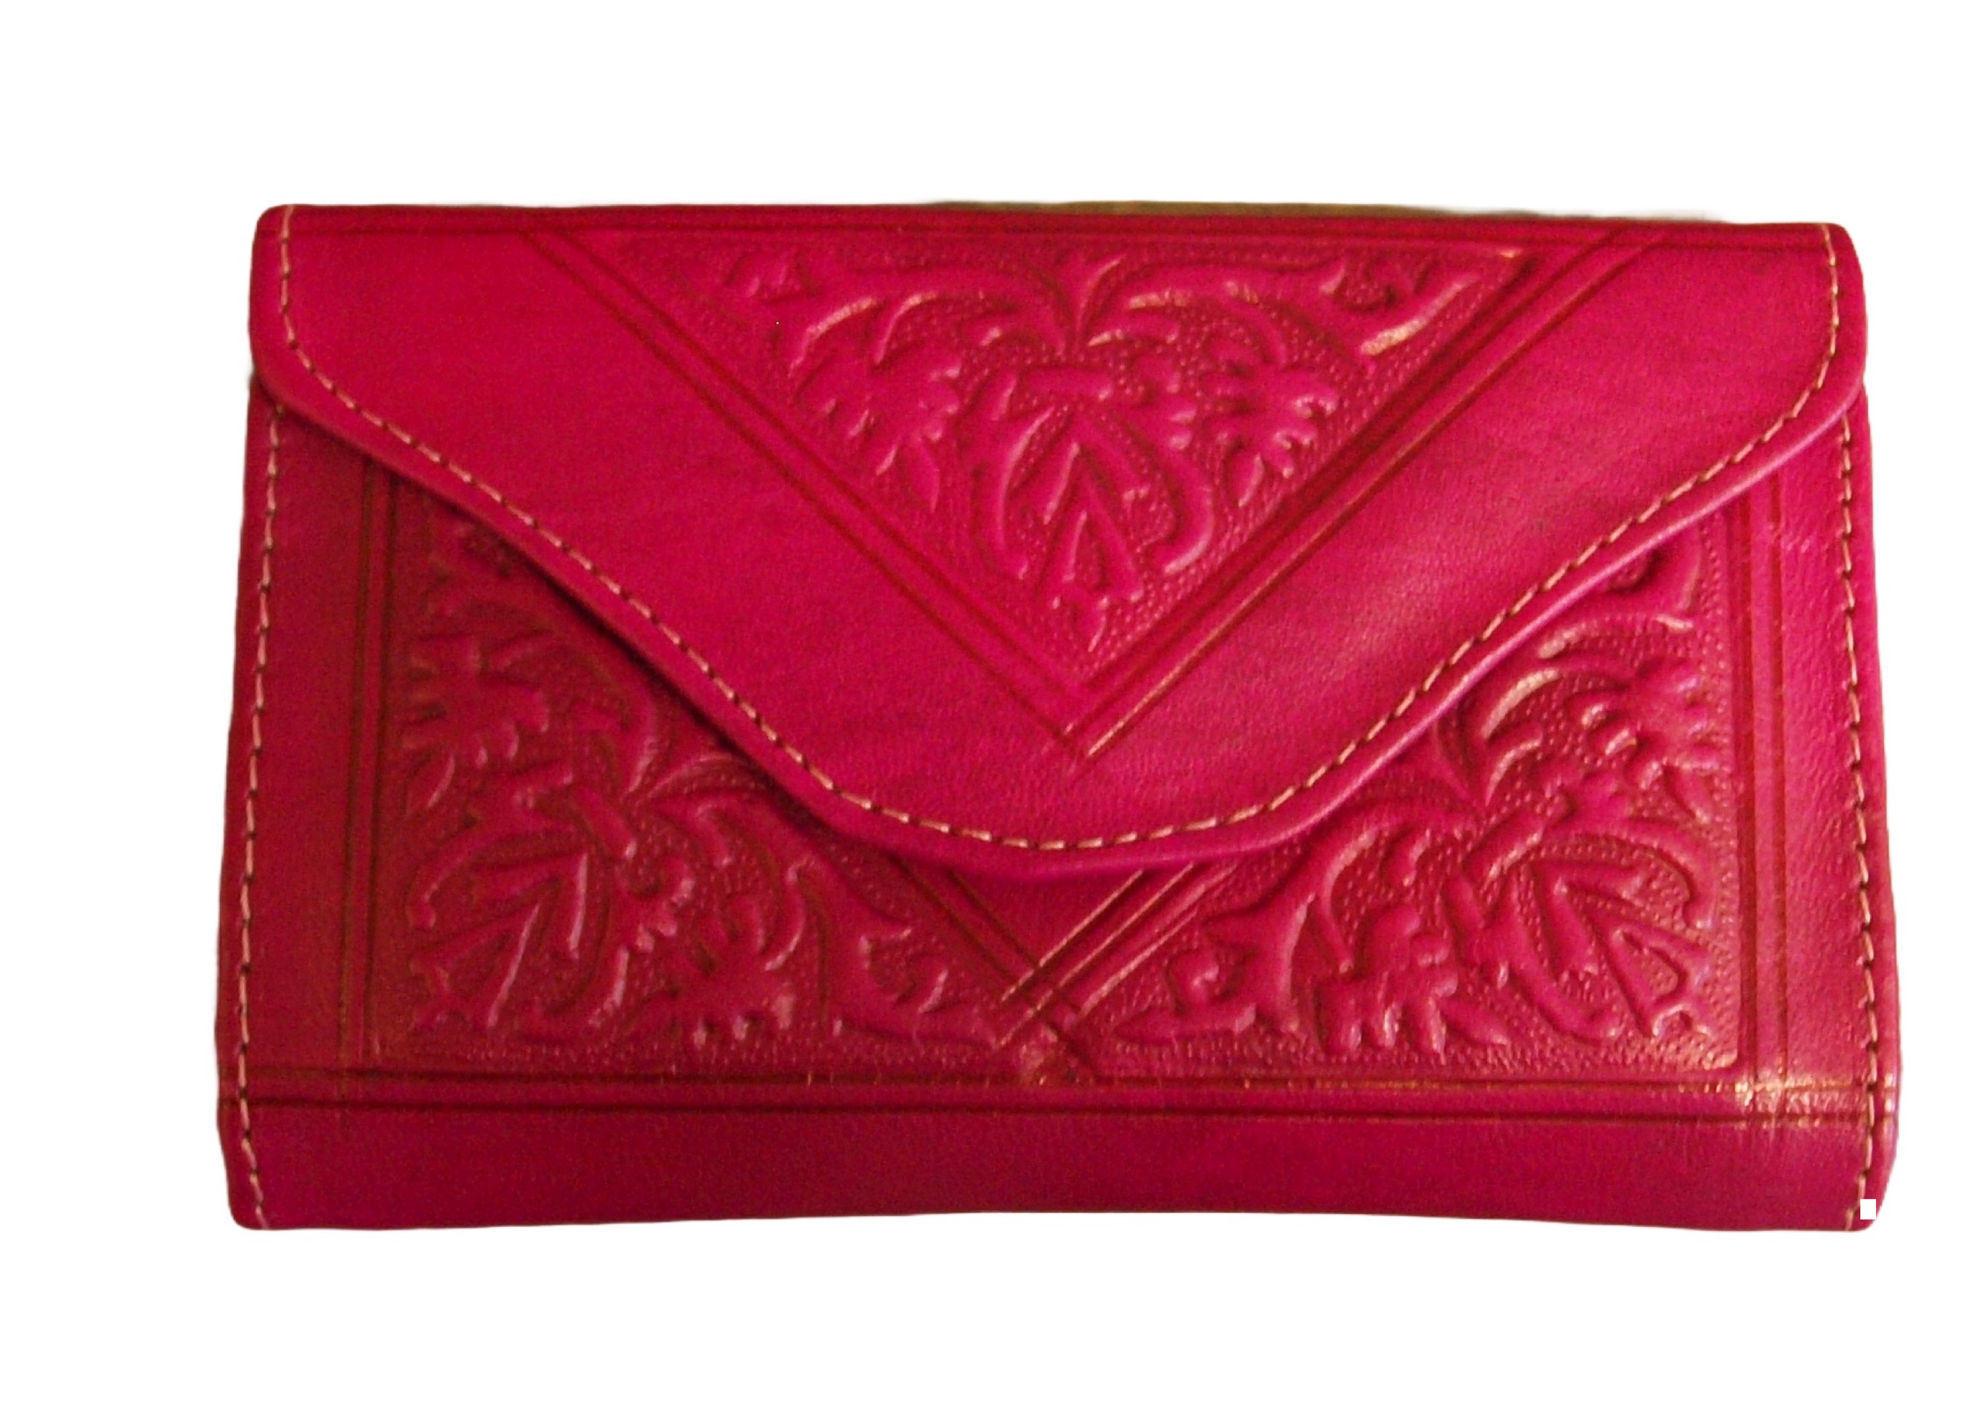 Small Leather Tri-Fold Purse Pink on White Background